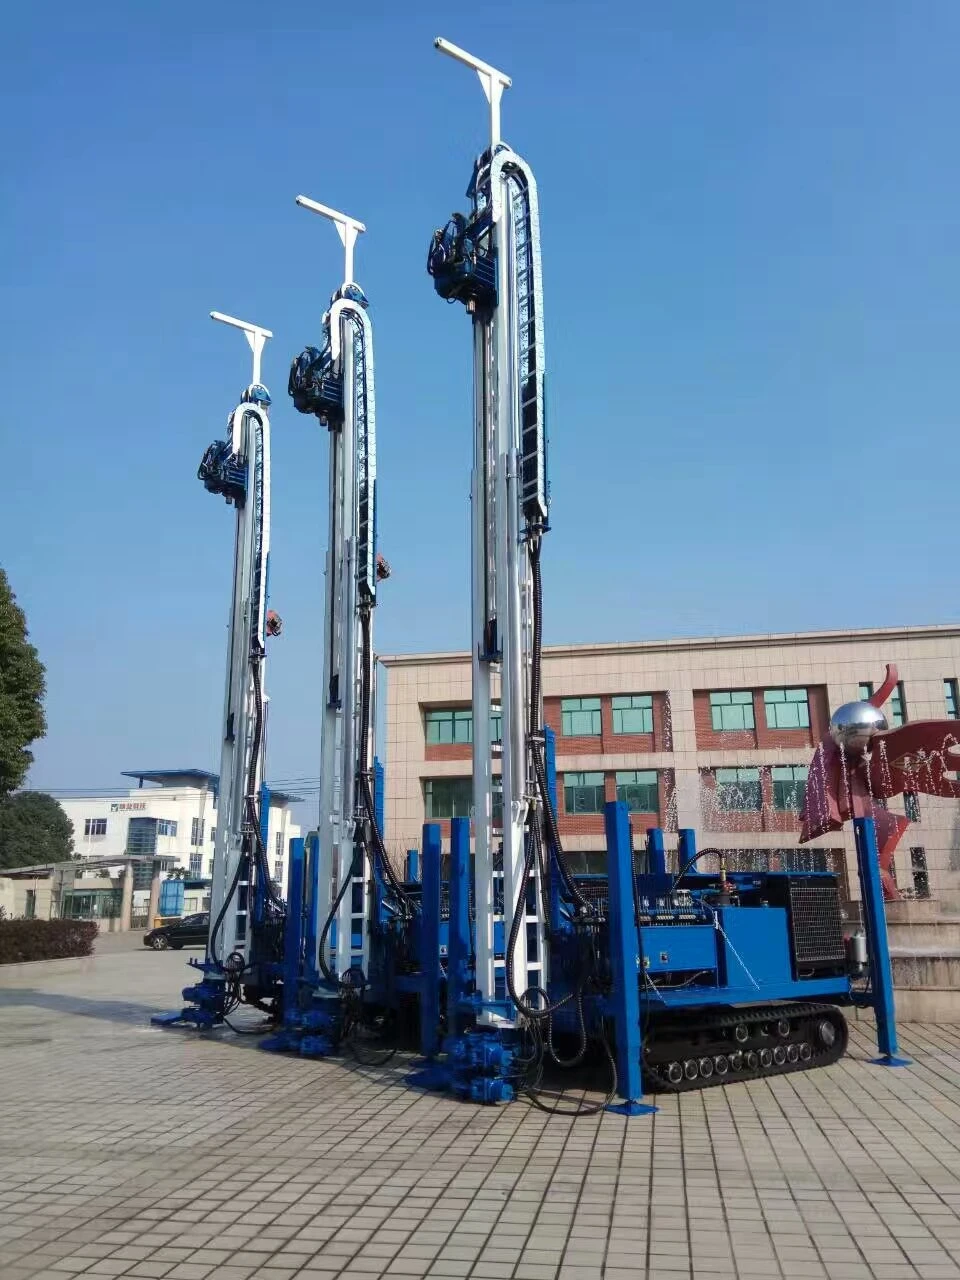 Ydl-300d Hydraulic Water Well Drilling Rig with High Power